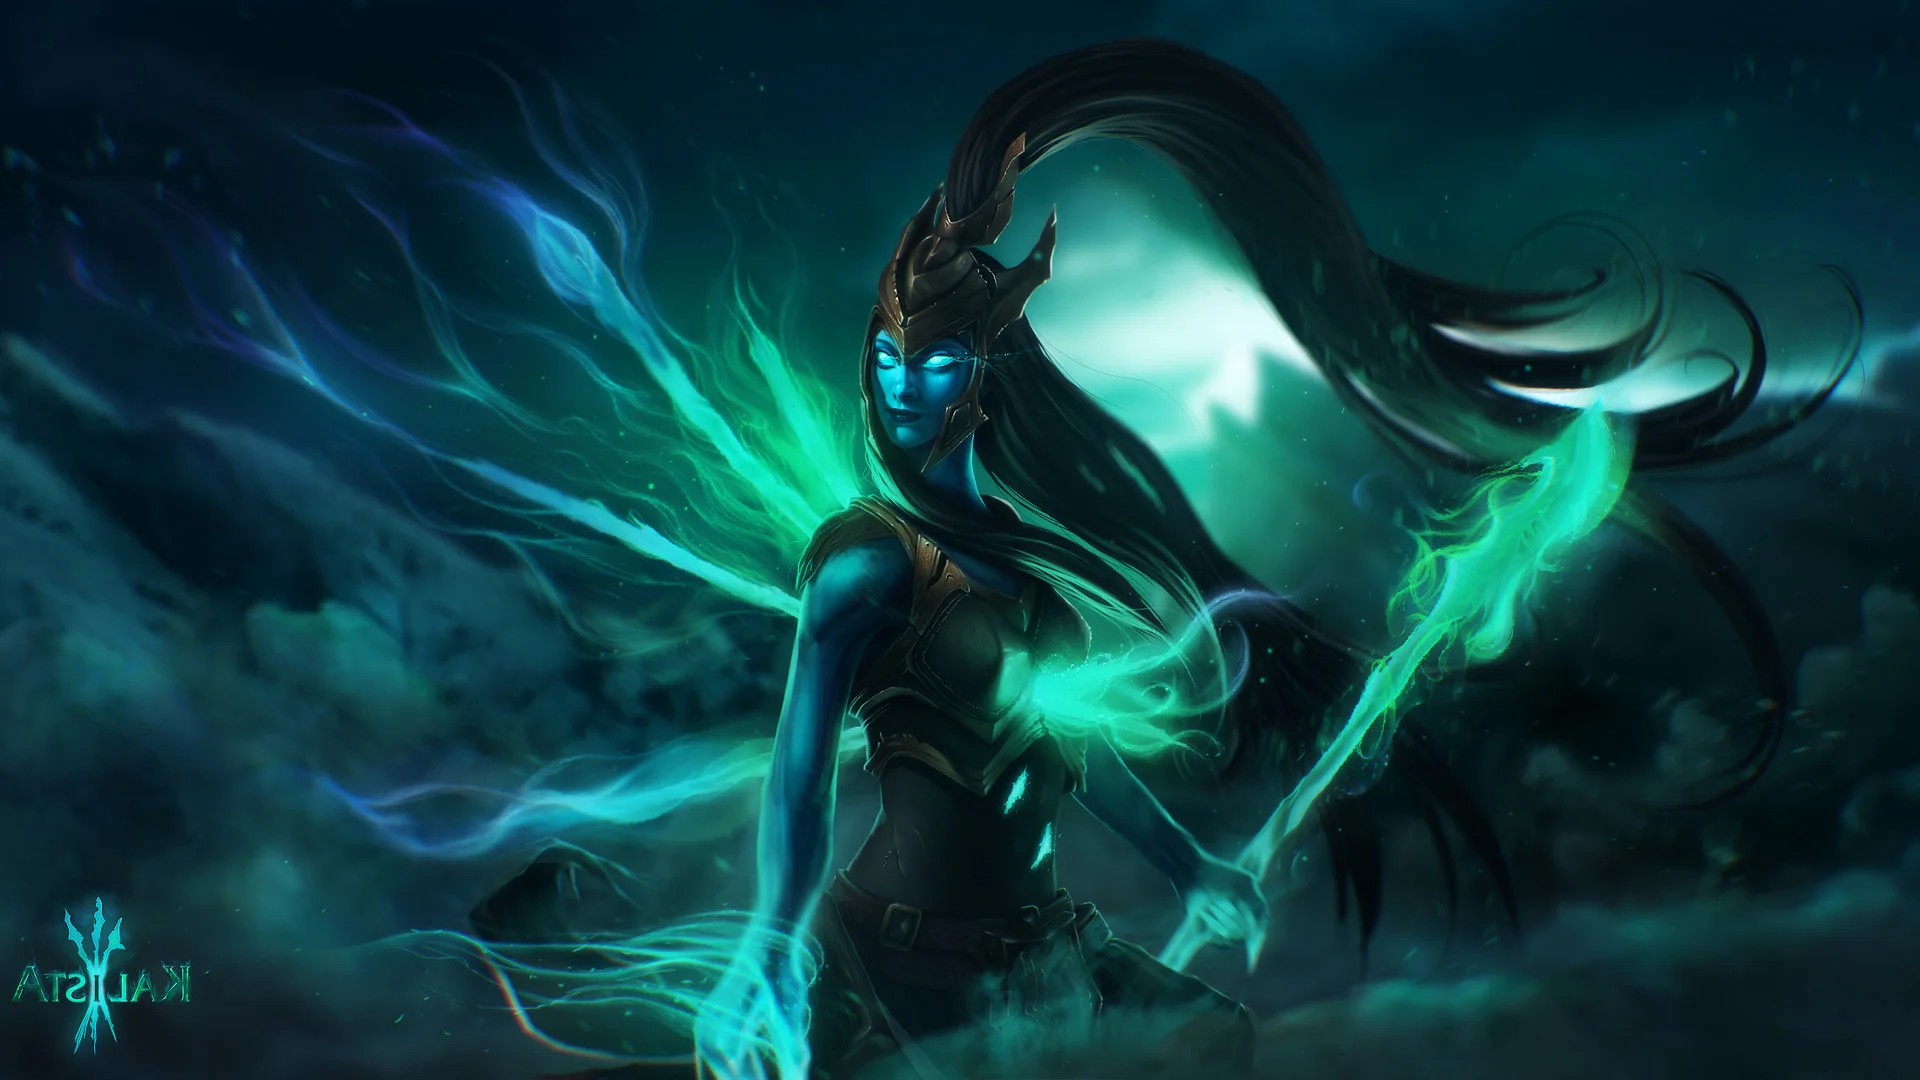 Video Games, Video Game Girls, Undead, Ghost, League Of Legends, Kalista